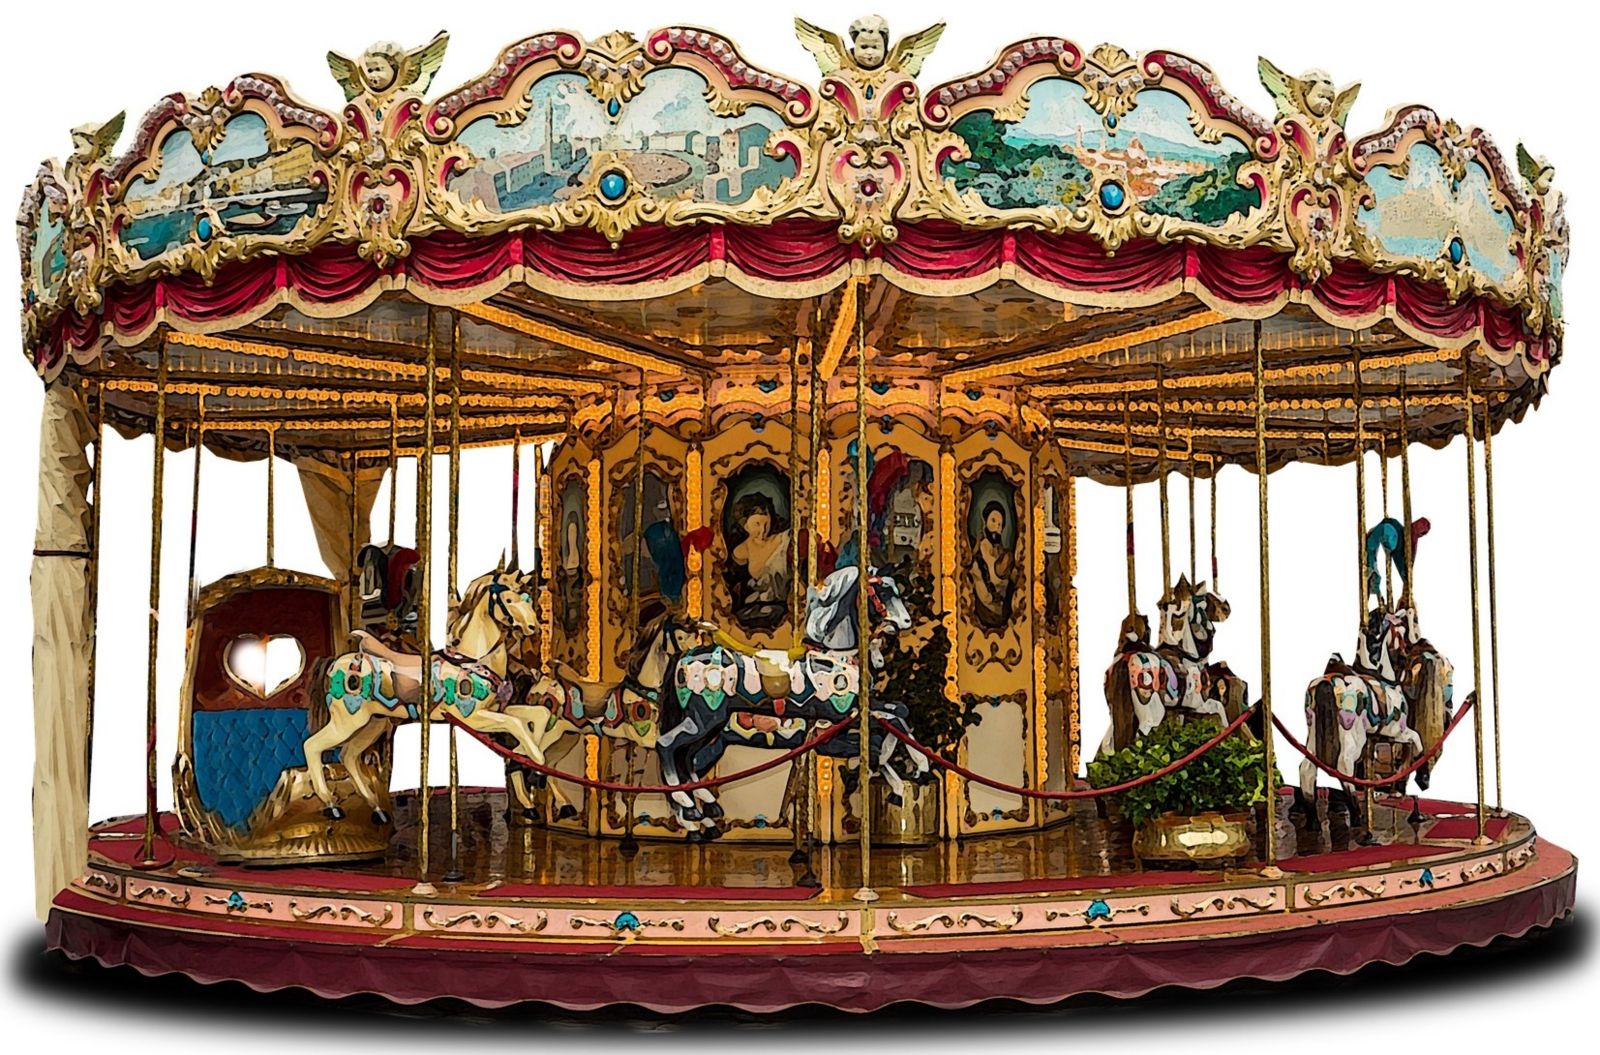 Victorian carousel fairground ride with red and gold accent colours. Roof is surrounded by landscape paintings in ornate panels alternating with cherubs. The centre column is covered with life-size portrait paintings. Horses and carriages with colourful decorations fill the carousel but no-one is riding them.